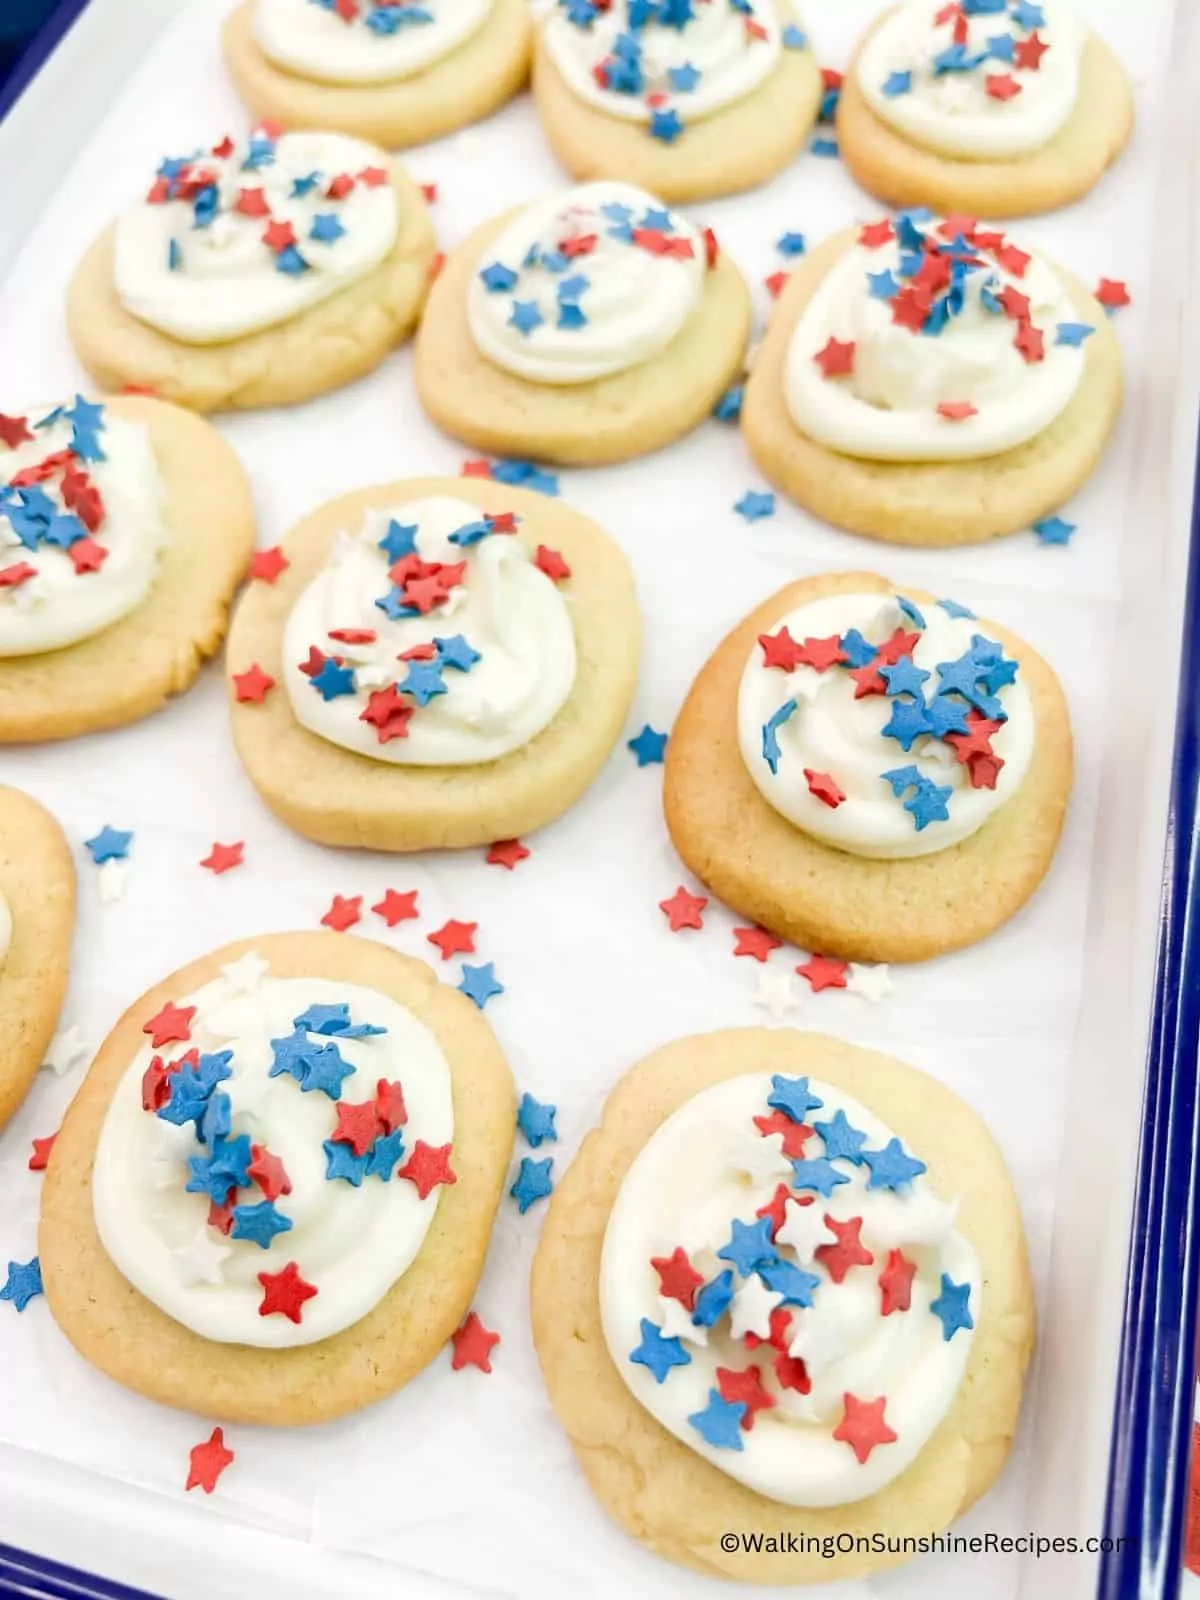 slice and bake cookies decorated for patriotic holidays on white and blue tray.